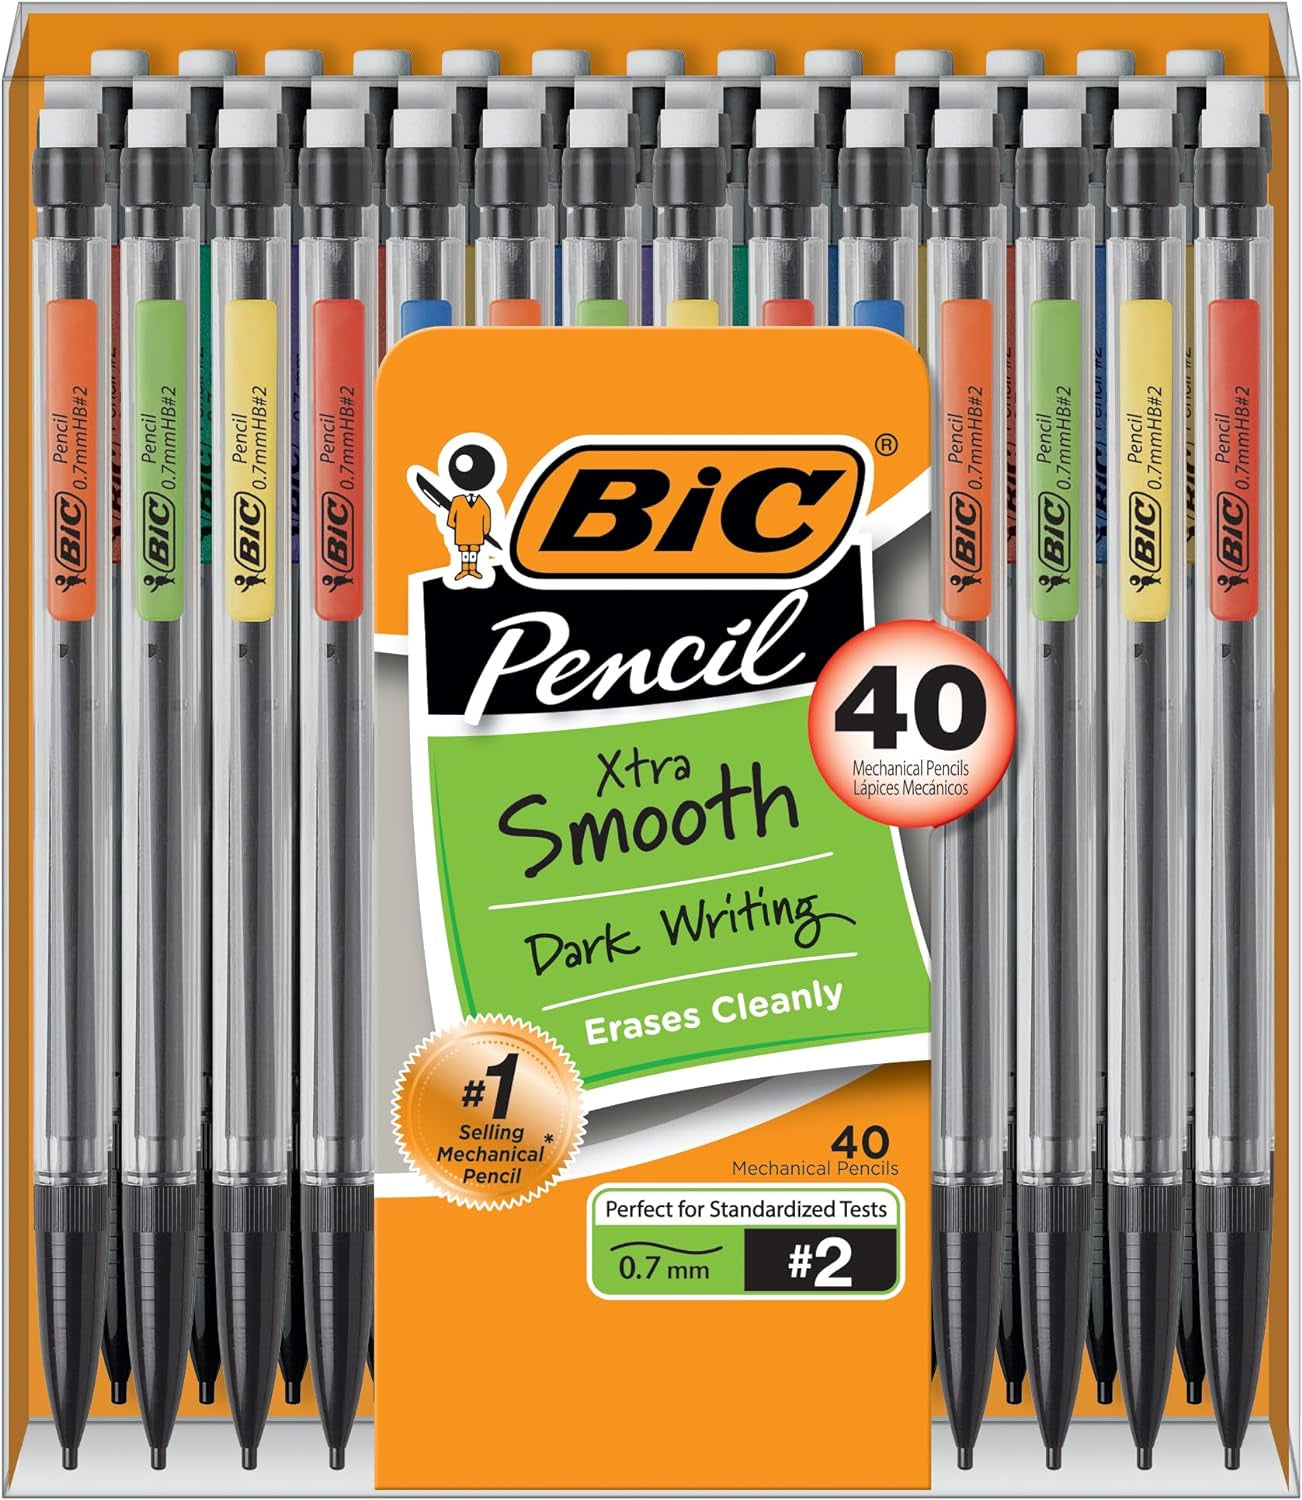 Xtra-Smooth Mechanical Pencils with Erasers (MPCE40-BLK), Bright Edition Medium Point (0.7Mm), 40-Count Pack, Bulk Mechanical Pencils for School, Barrel Colors May Vary